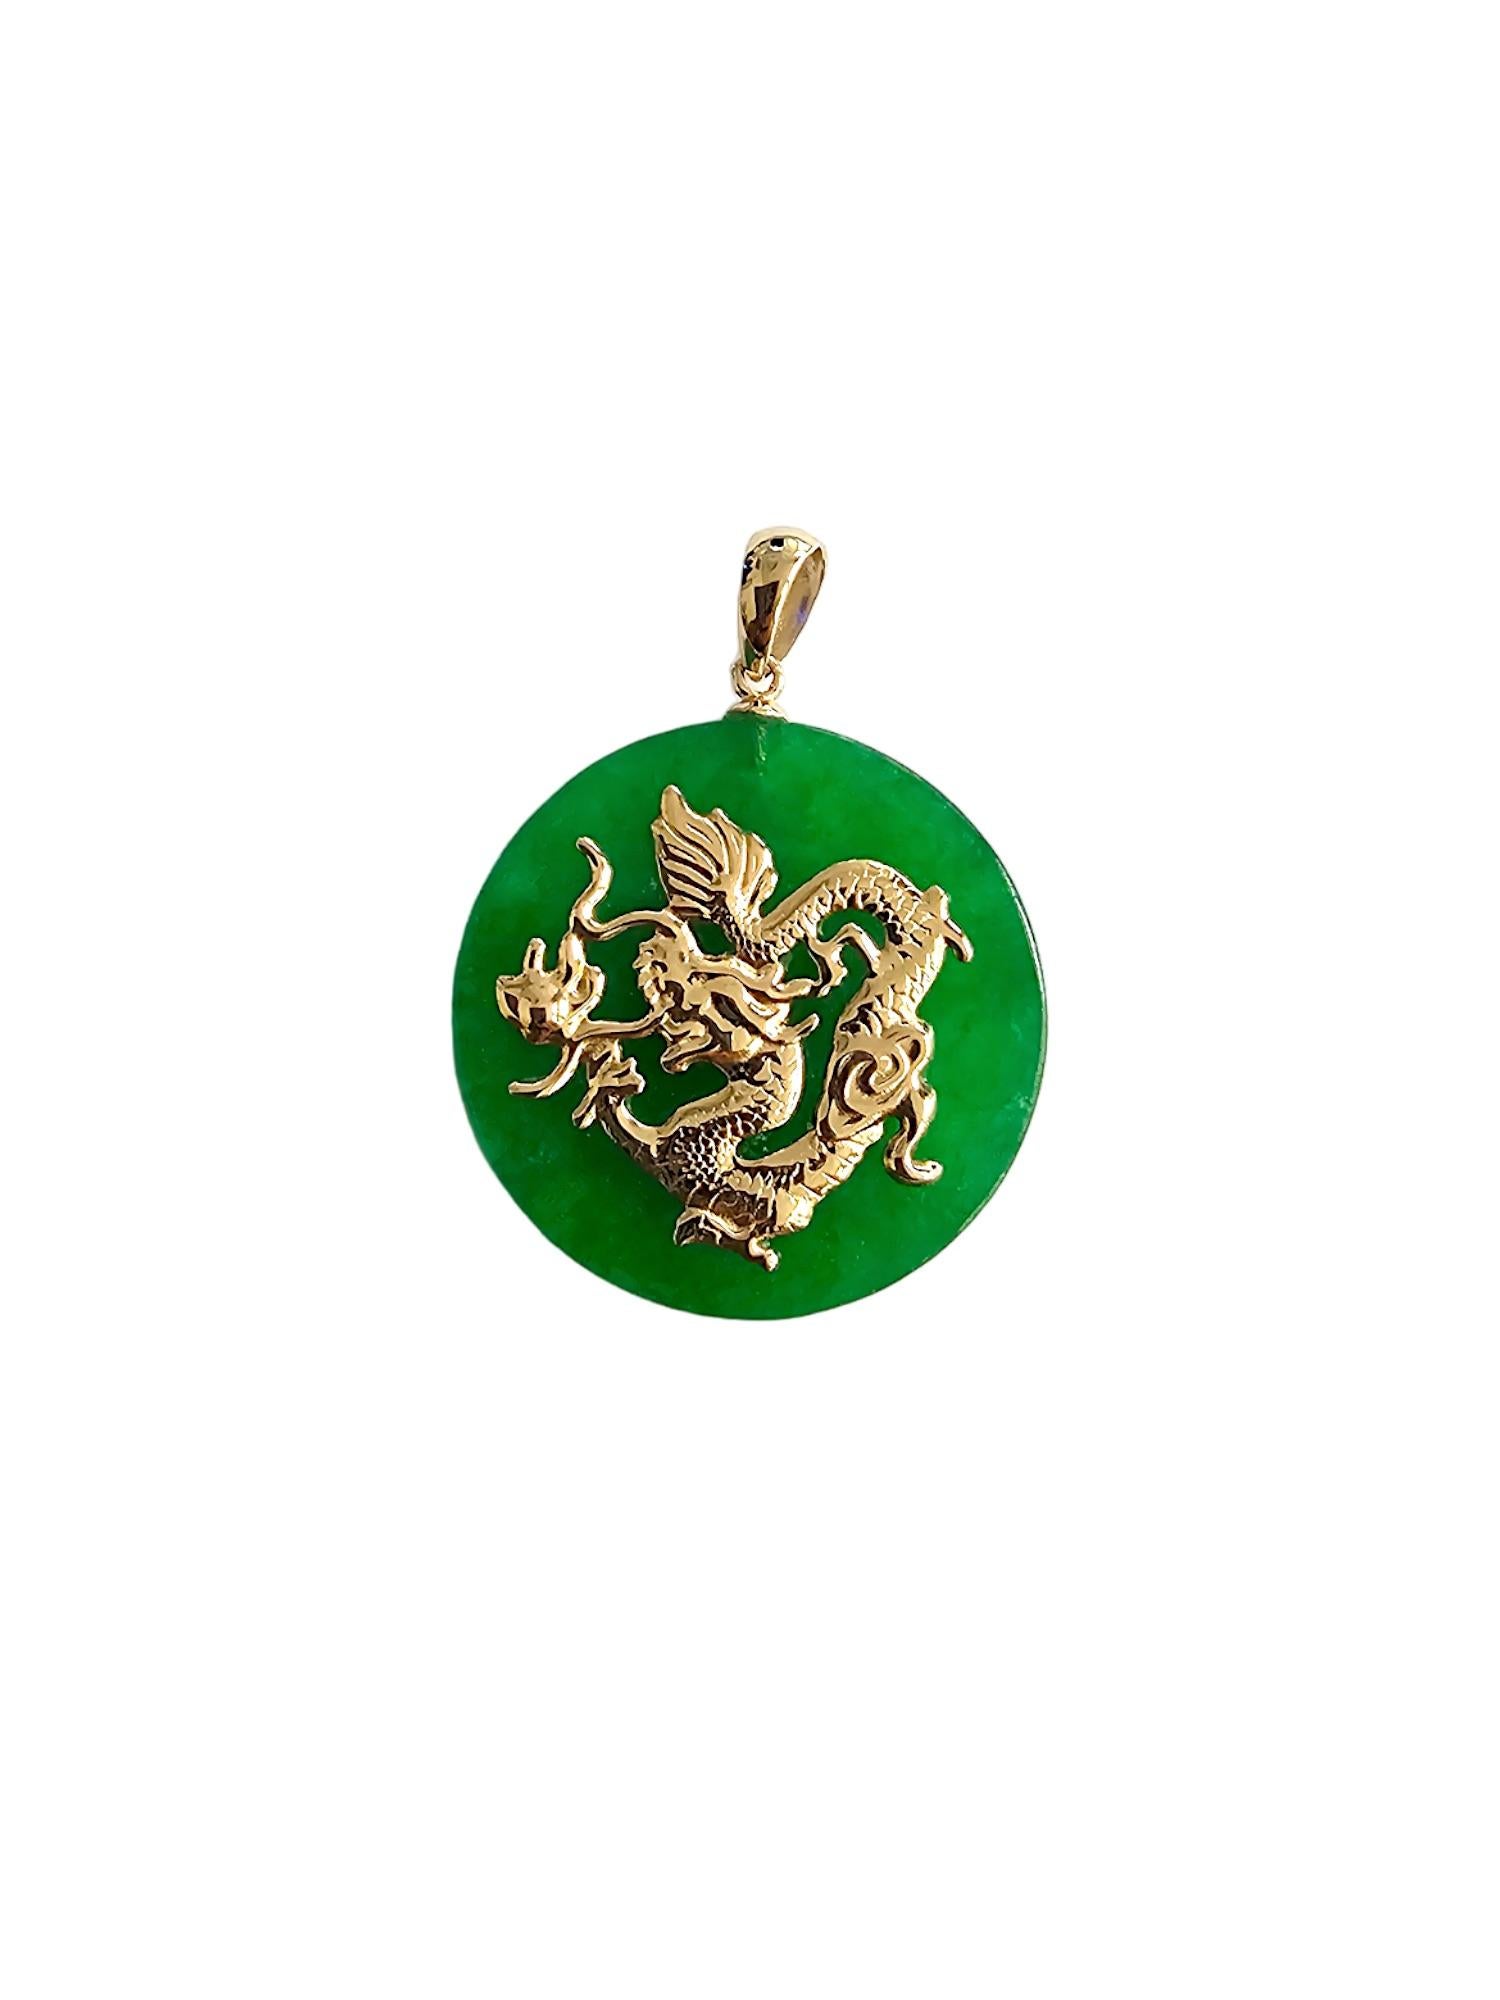 TKO Green Jade Dragon Pendant (with 14K Yellow Gold) 25mm Disc

Using our signature dragon design, we create a bold statement with a 14K Yellow Gold Dragon imposed on a green Jadeite disc. We use the bold green hues and contrast them with Yellow